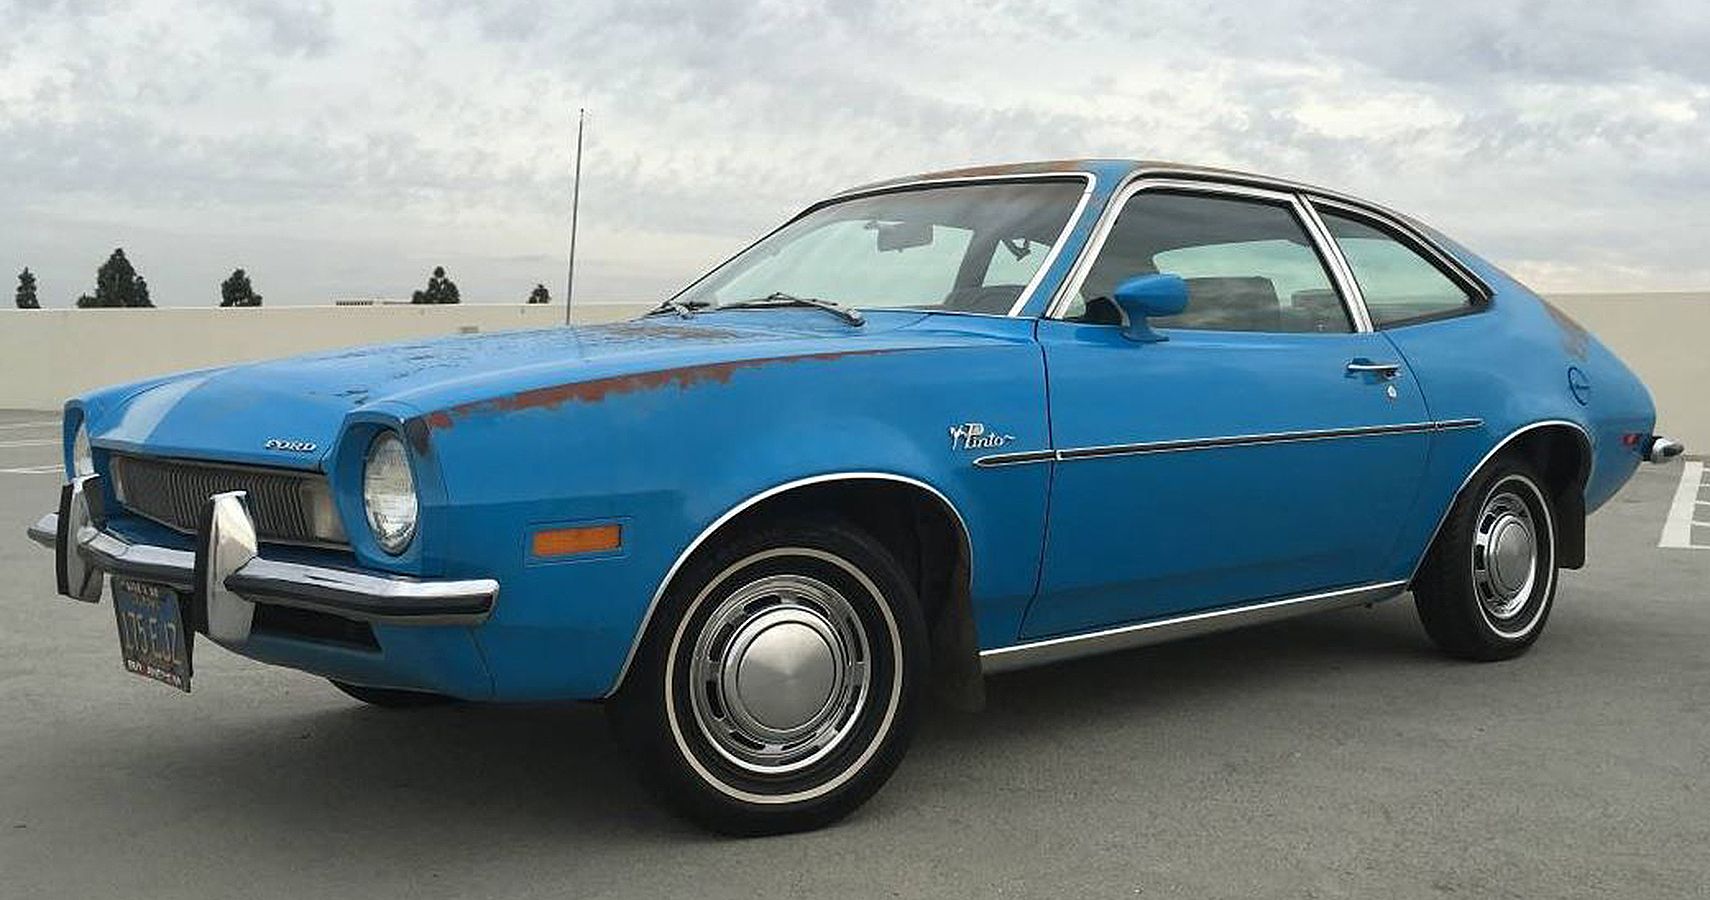 10 Things You Didn't Know About The Ford Pinto